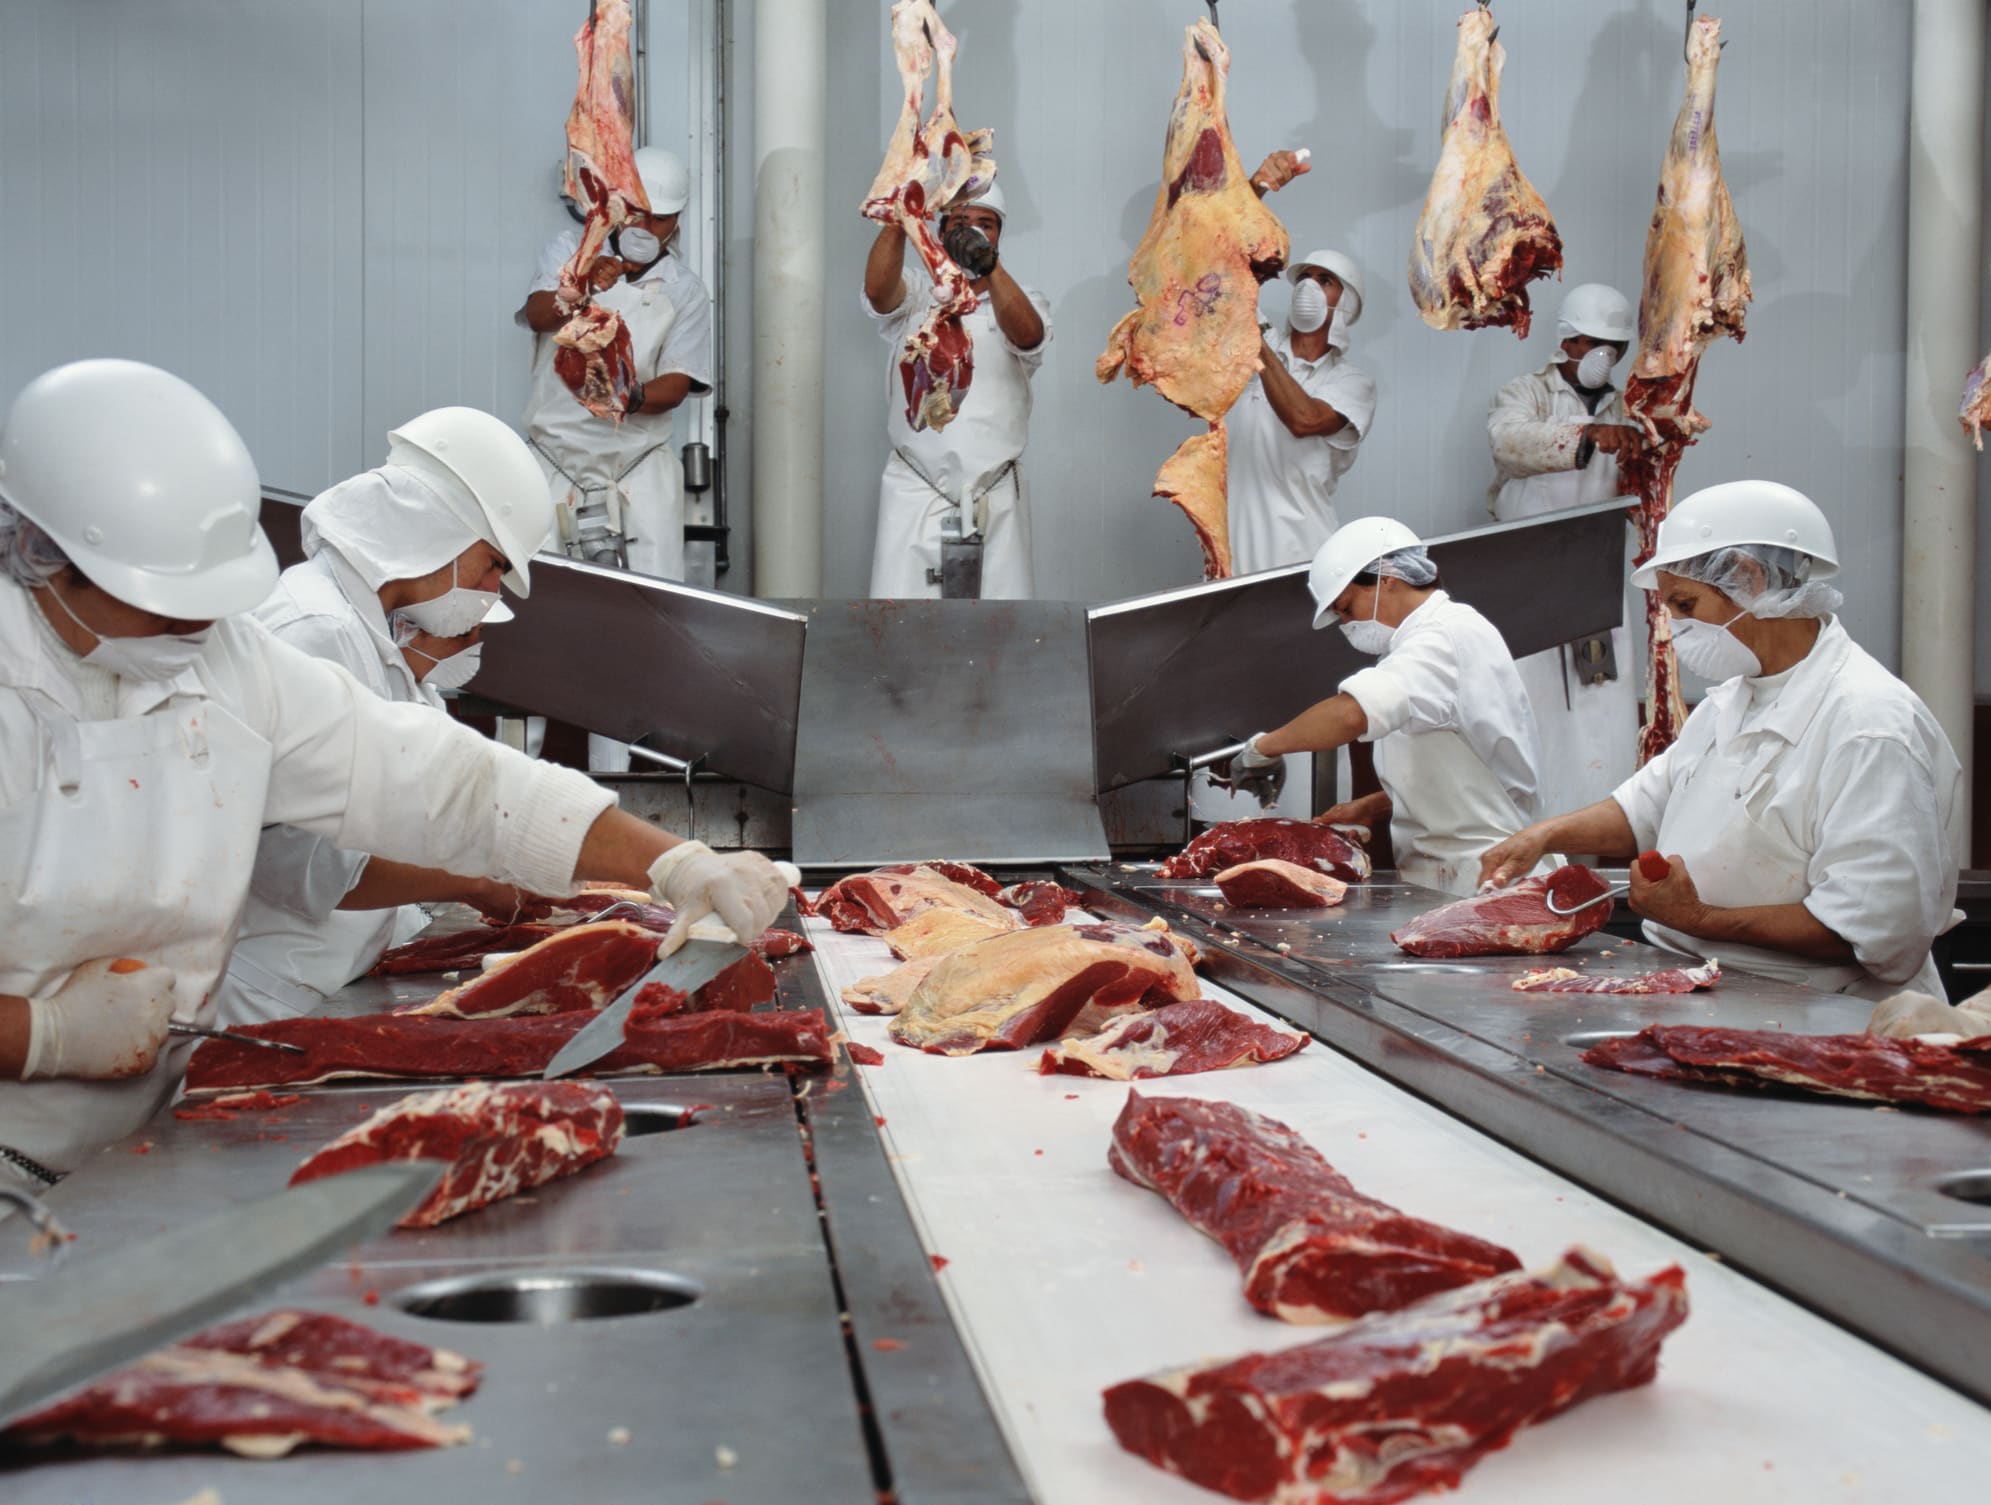 Butchers cutting beef in slaughterhouse, wearing hygienic masks